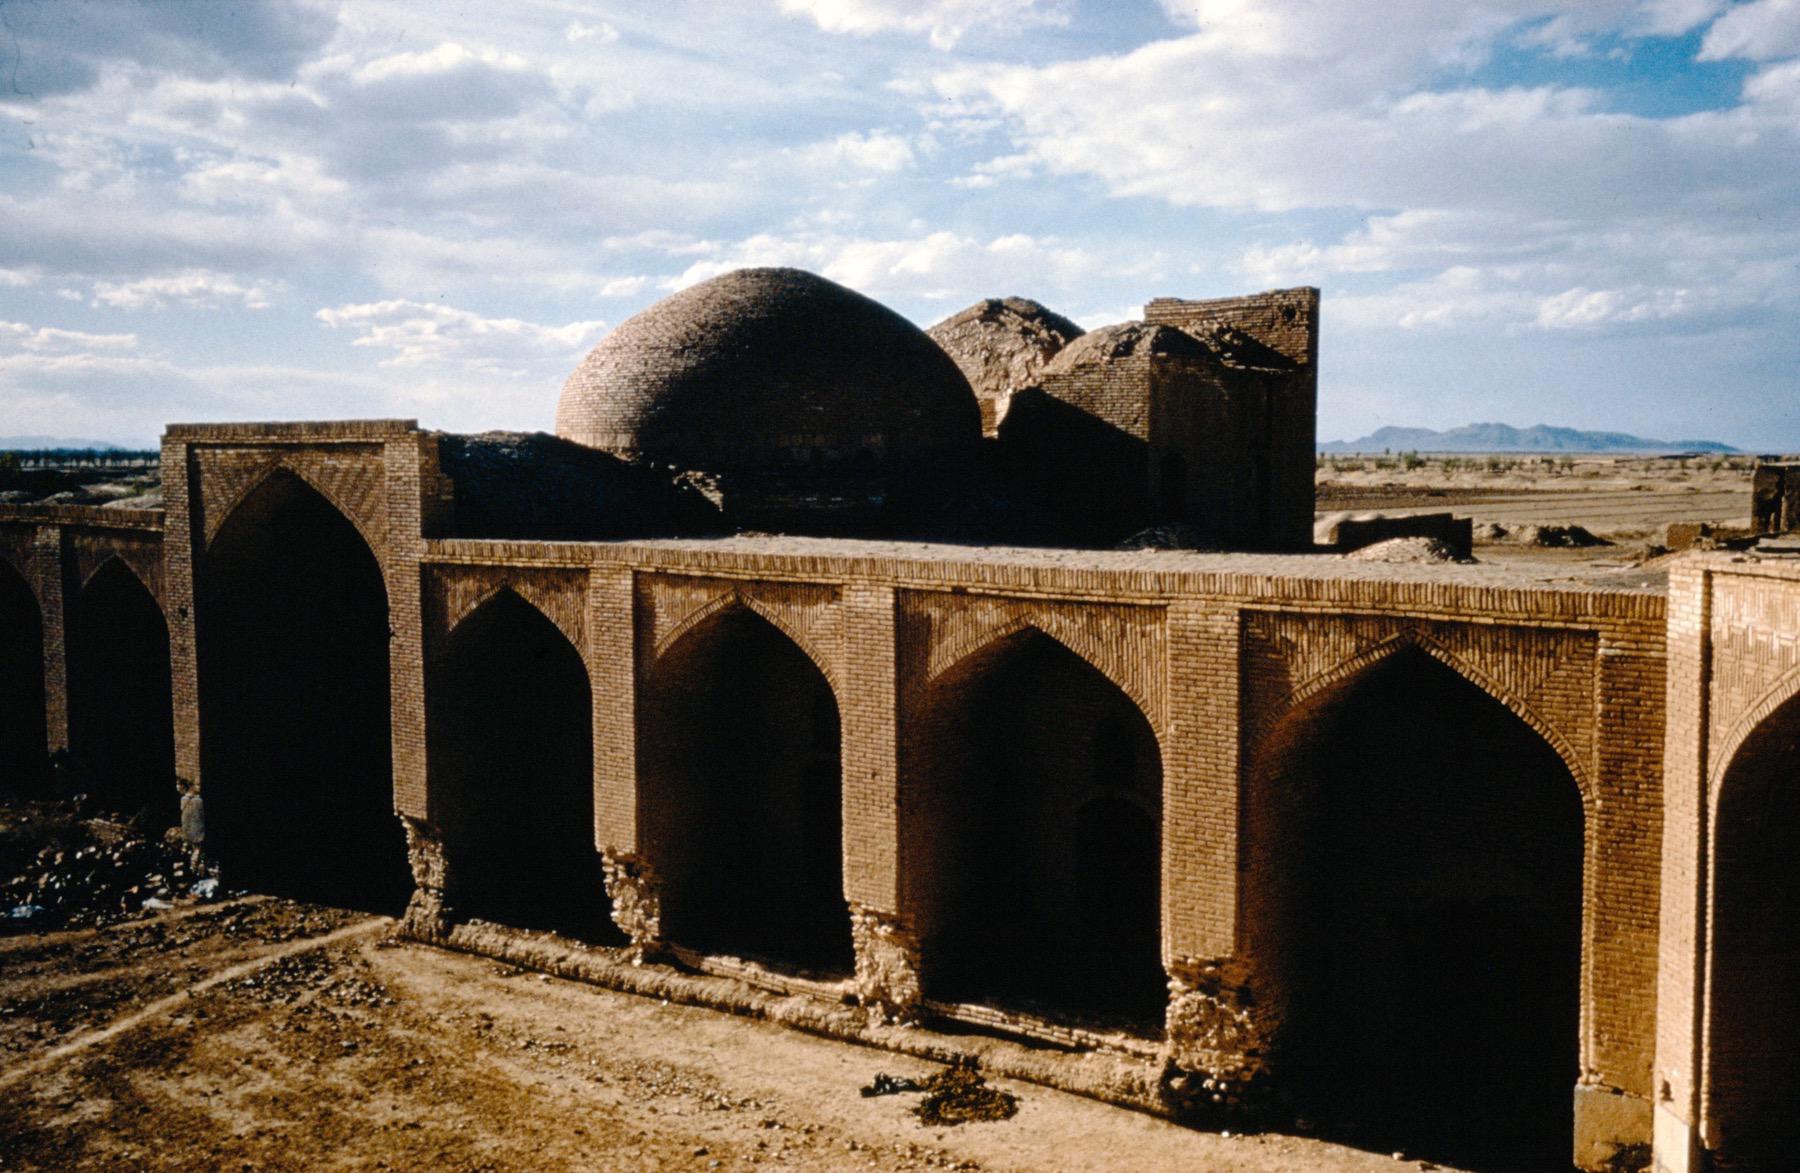 Elevated view of courtyard showing the interior arcade and the dome over the entrance vestibule